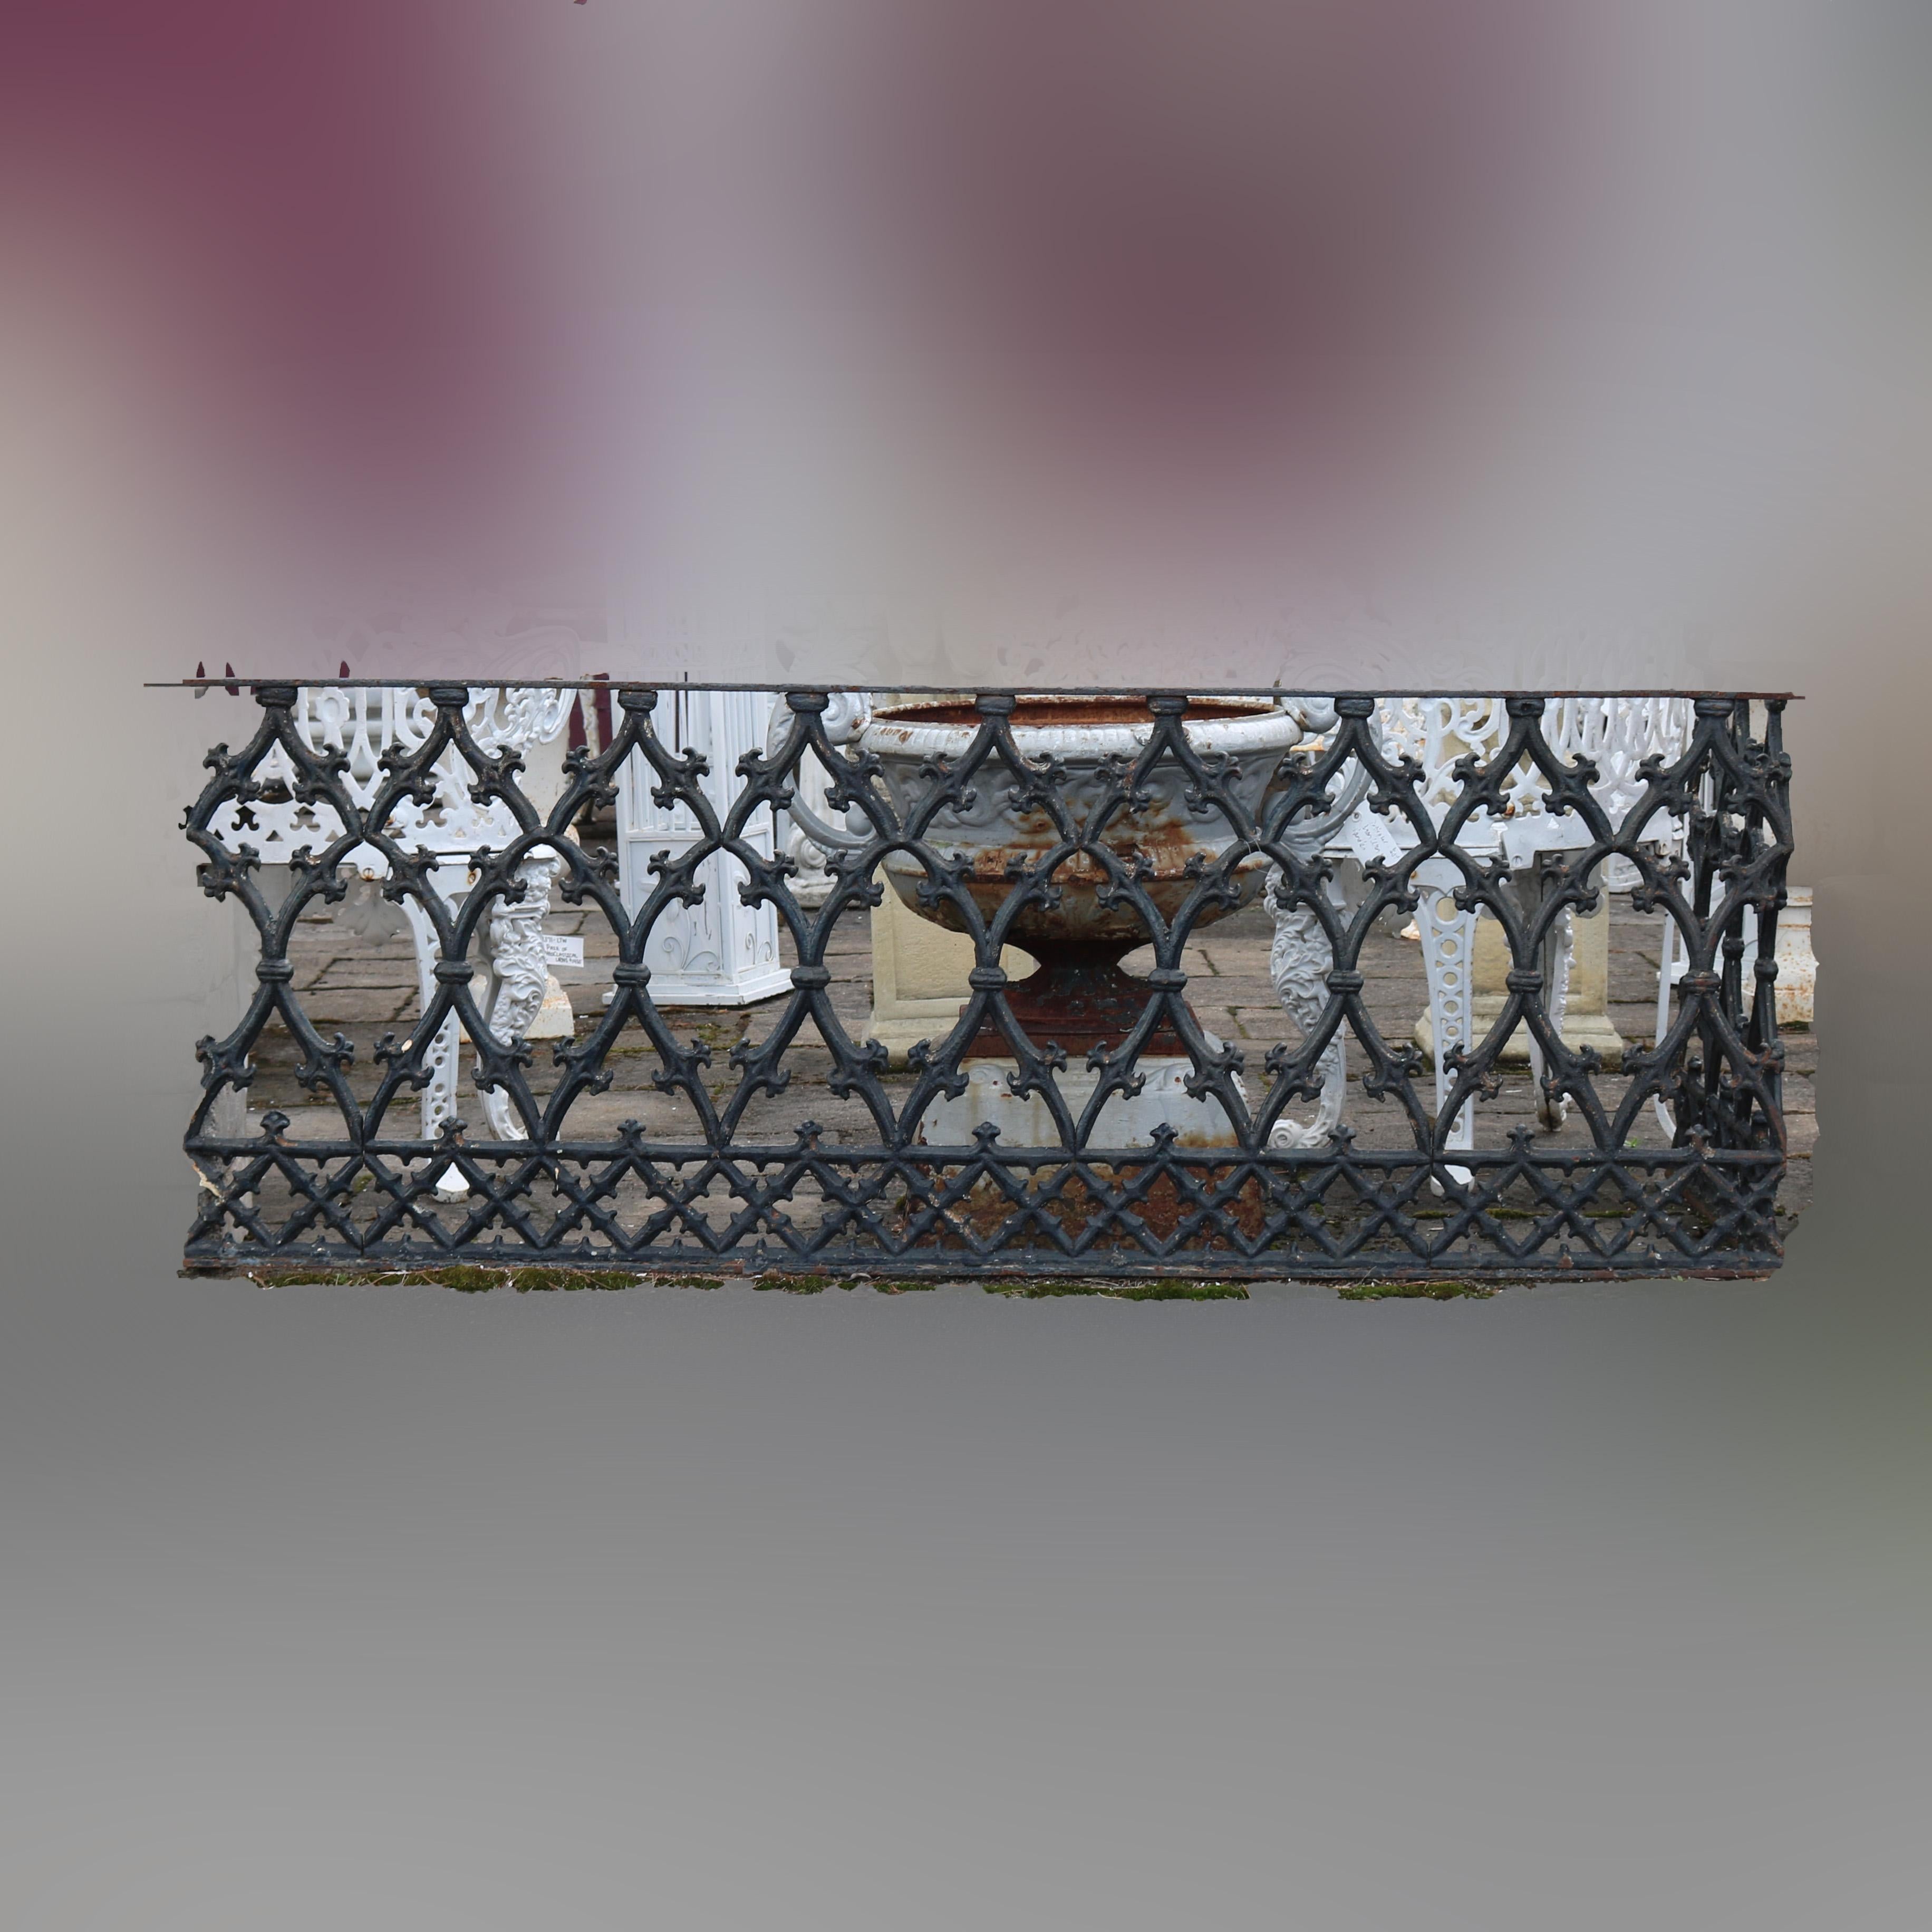 A pair of antique balcony or fencing corners offer cast iron construction with scroll lattice design, painted black, architectural elements, 19h century.

Measures: 71.5